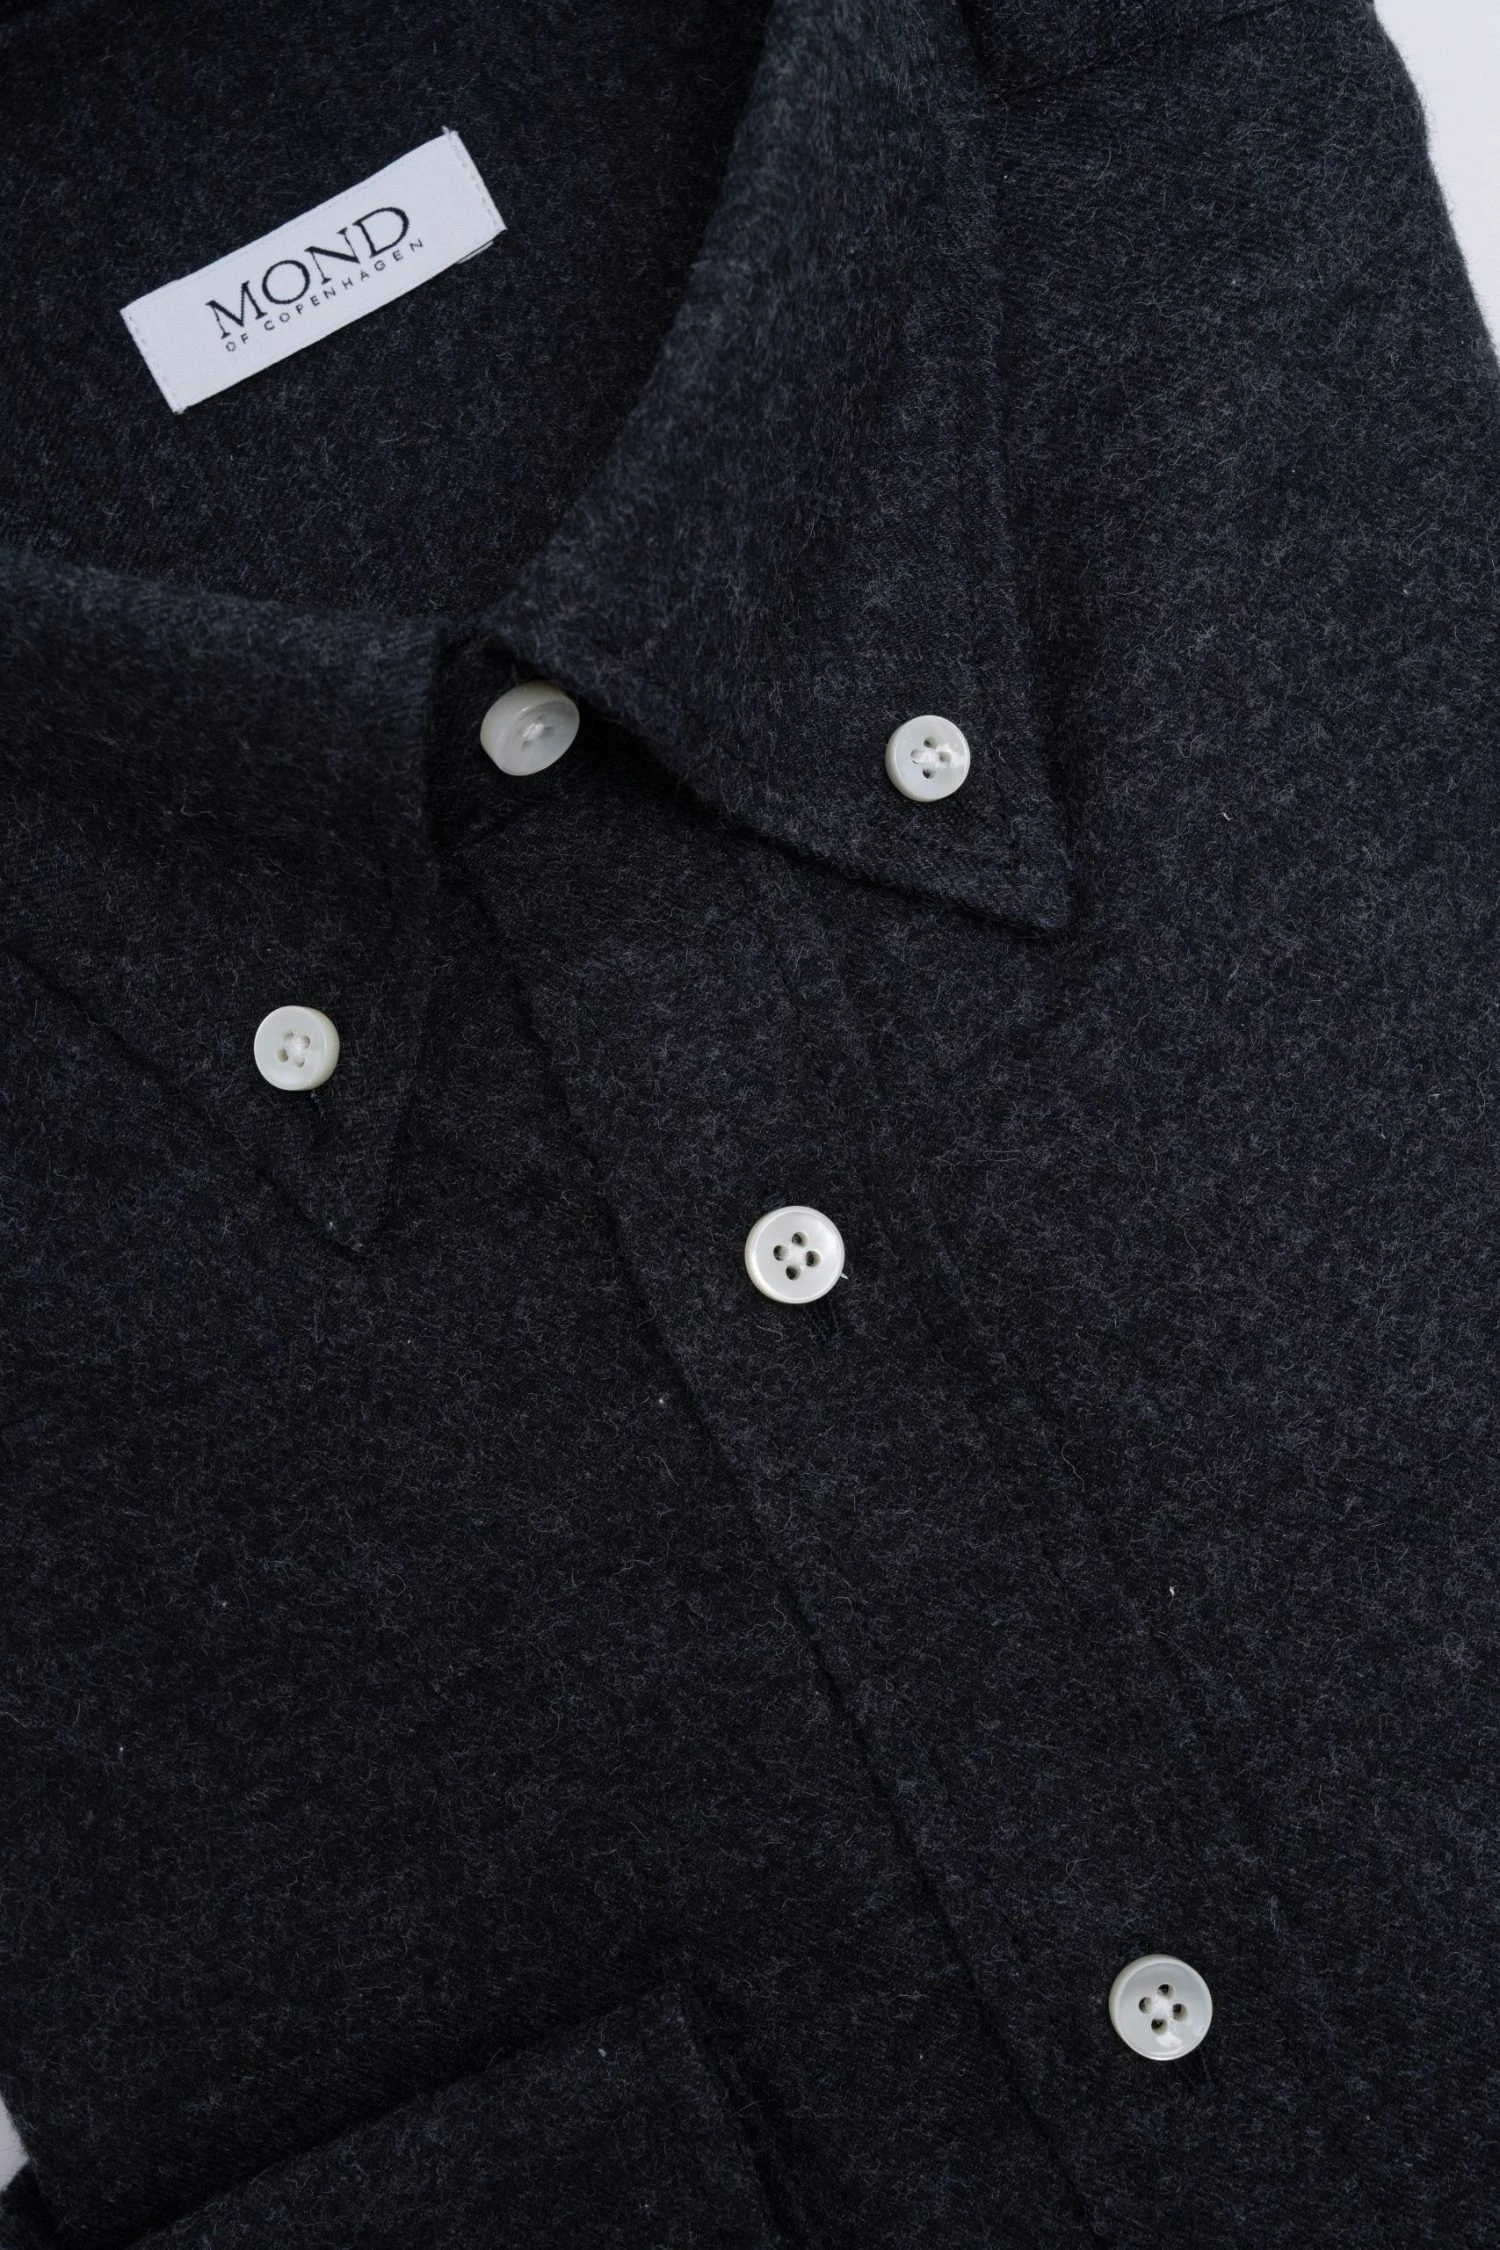 Charcoal Kashco Shirt made of cotton and cashmere mix, custom made by mond of copenhagen